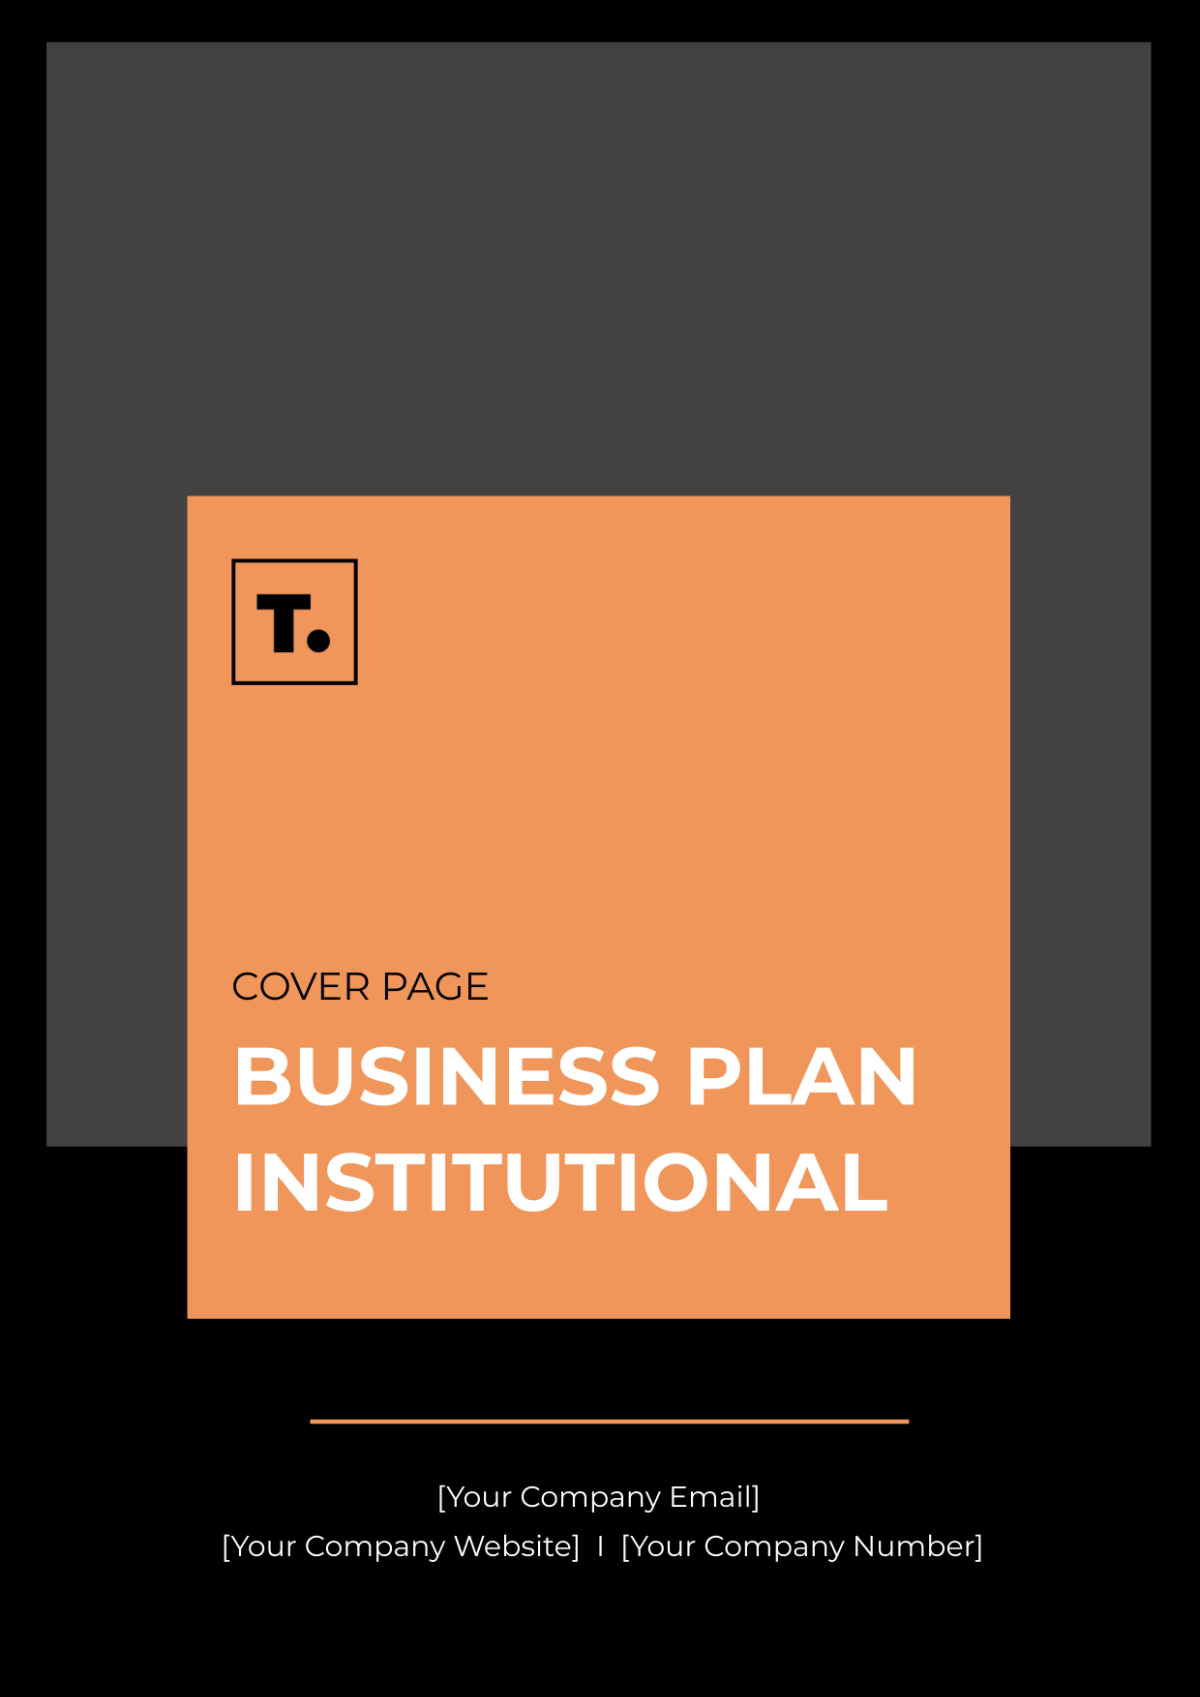 Business Plan Institutional Cover Page